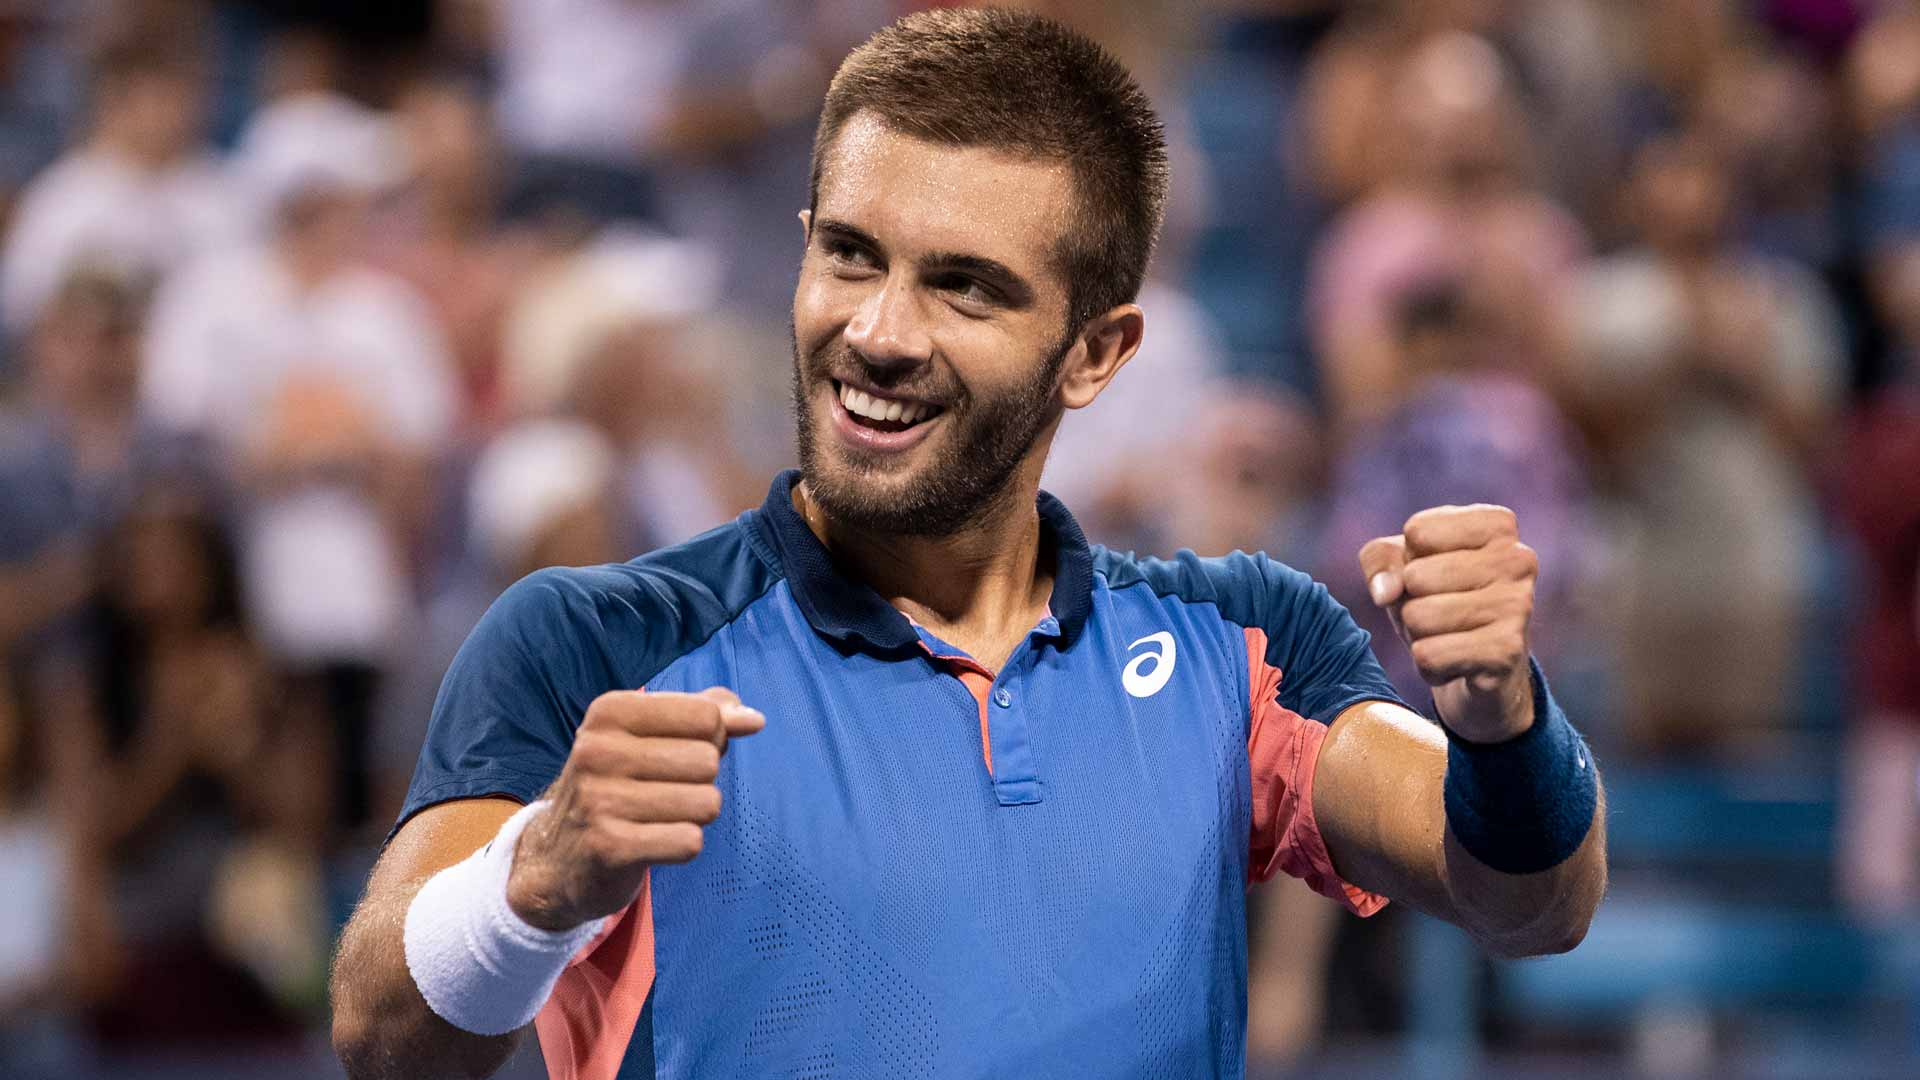 Borna Coric has climbed as high as No. 12 in the Pepperstone ATP Rankings.